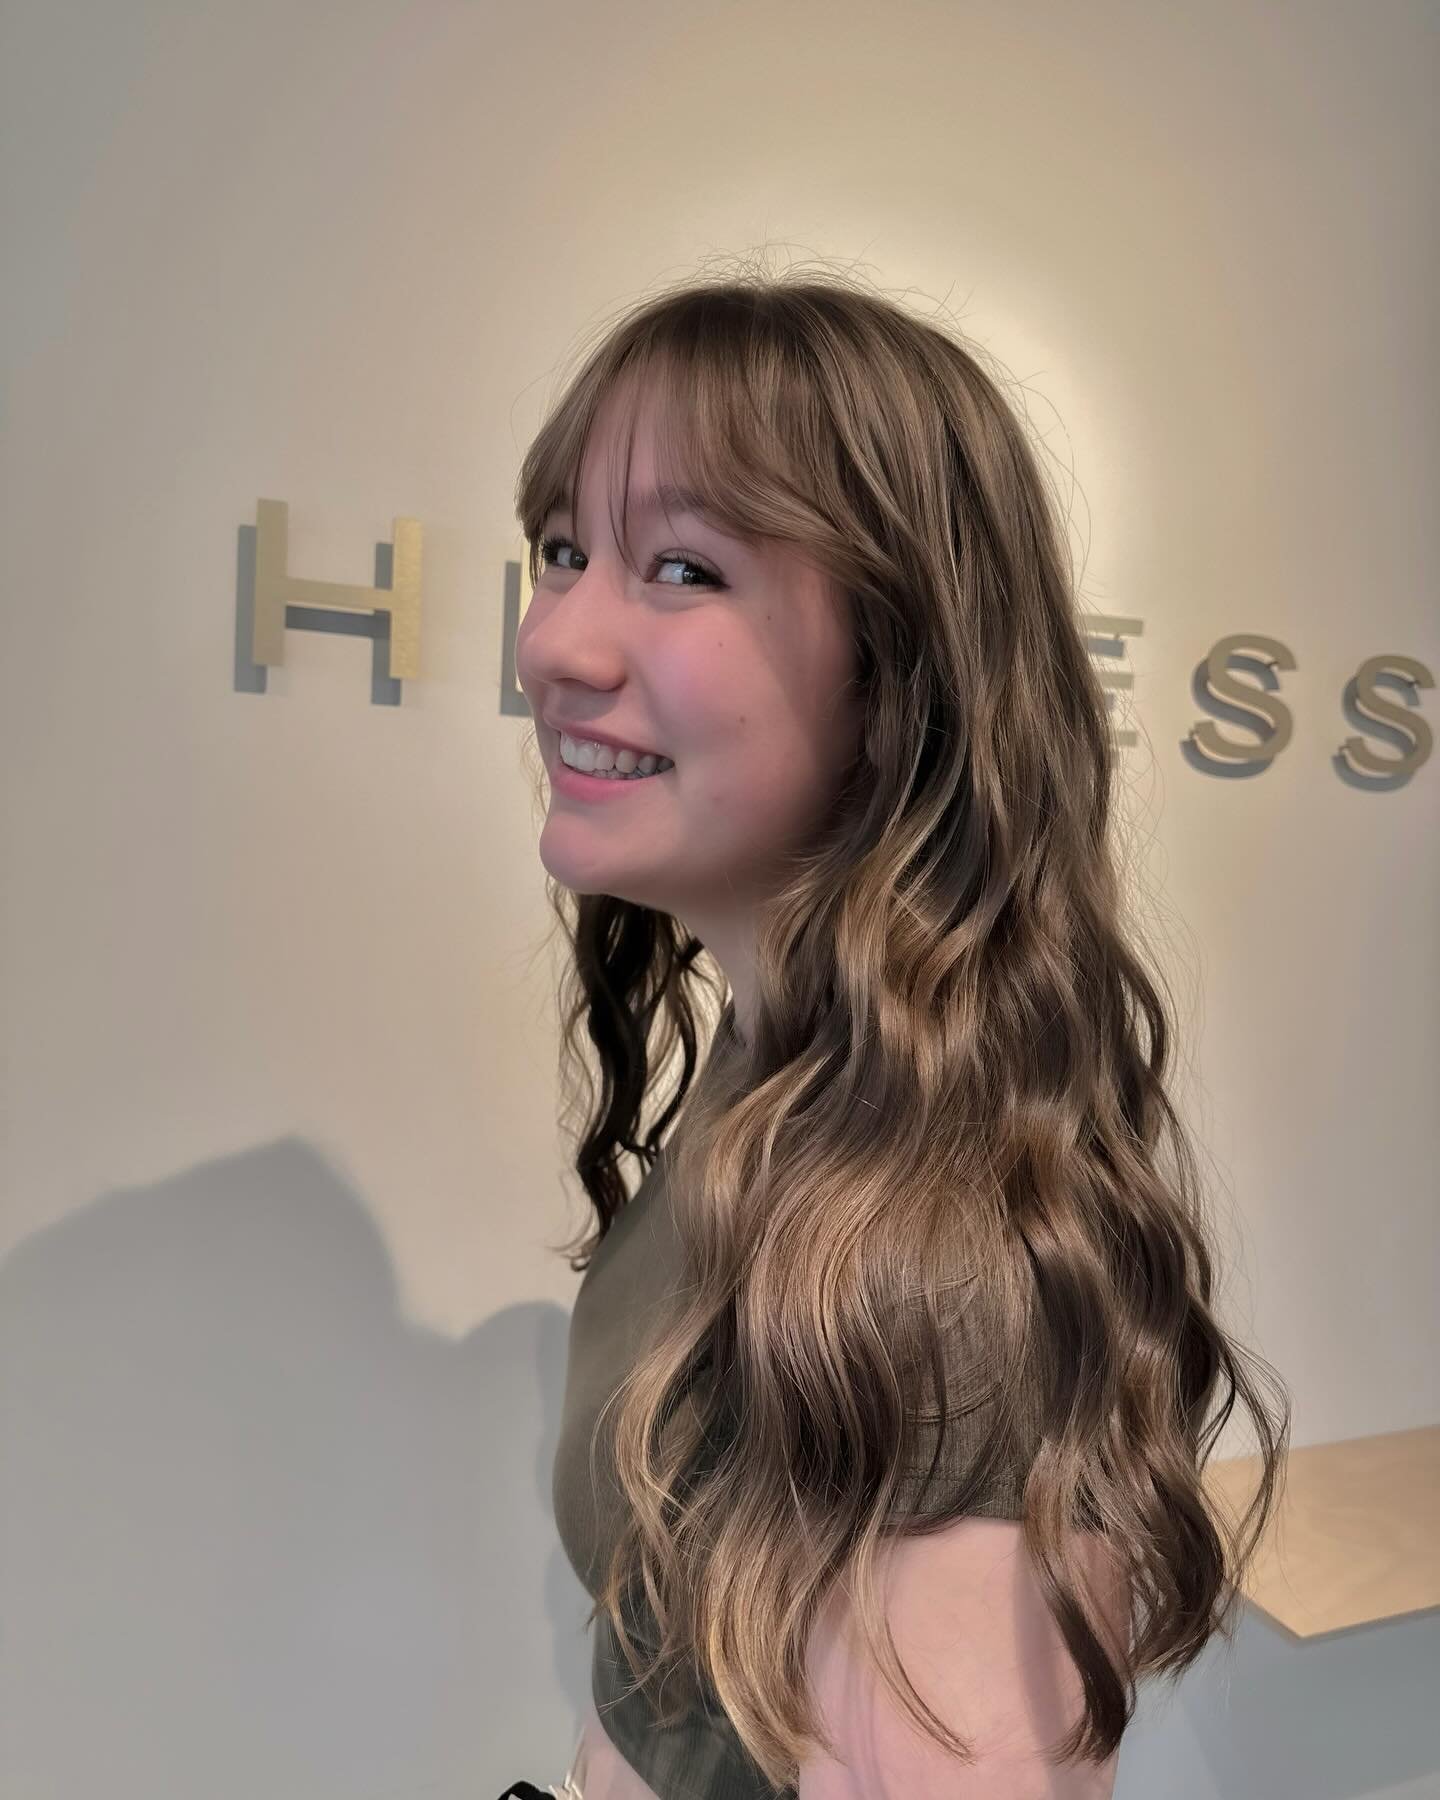 Hair by @hairby.emersontaylor 

Who are our New Talents, and what services do they provide?

Introducing, Emerson and Aleyna, who are crafting their excellence in providing a wide range of professional services:
-Long and medium-length haircuts 
-Foi